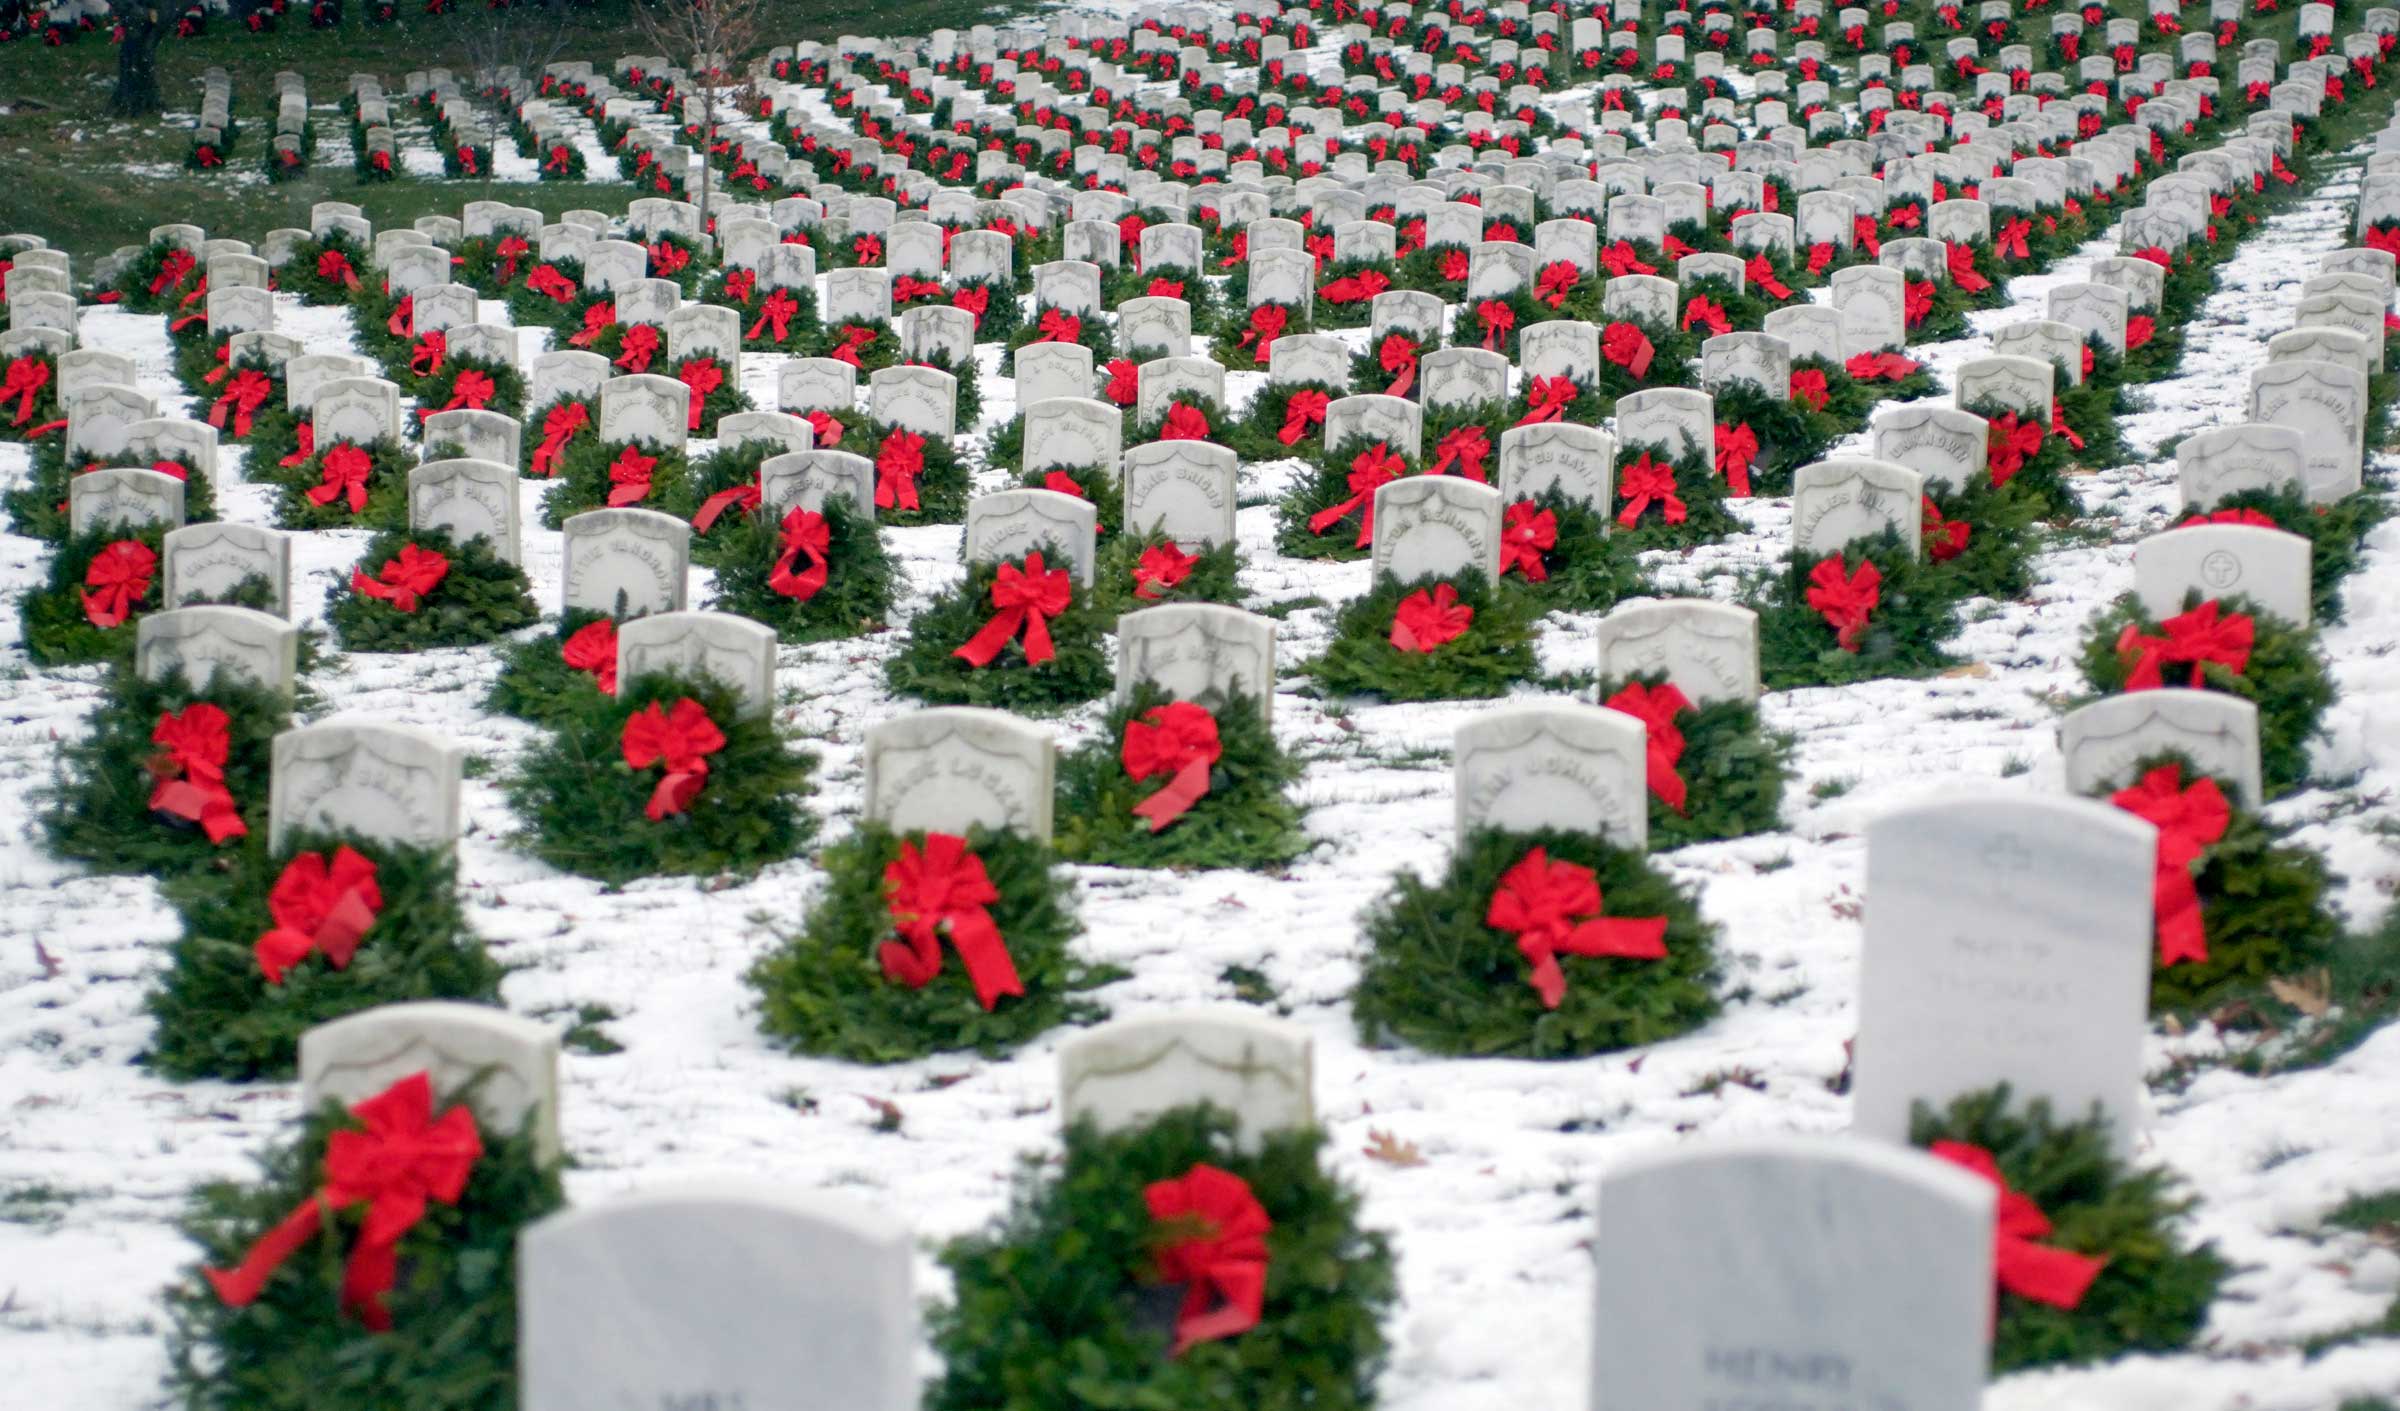 This iconic image became viral in 2005, inspiring increased national interest in the annual tribute and prompting the formation of Wreaths Across America as a non-profit 501-(c)(3)